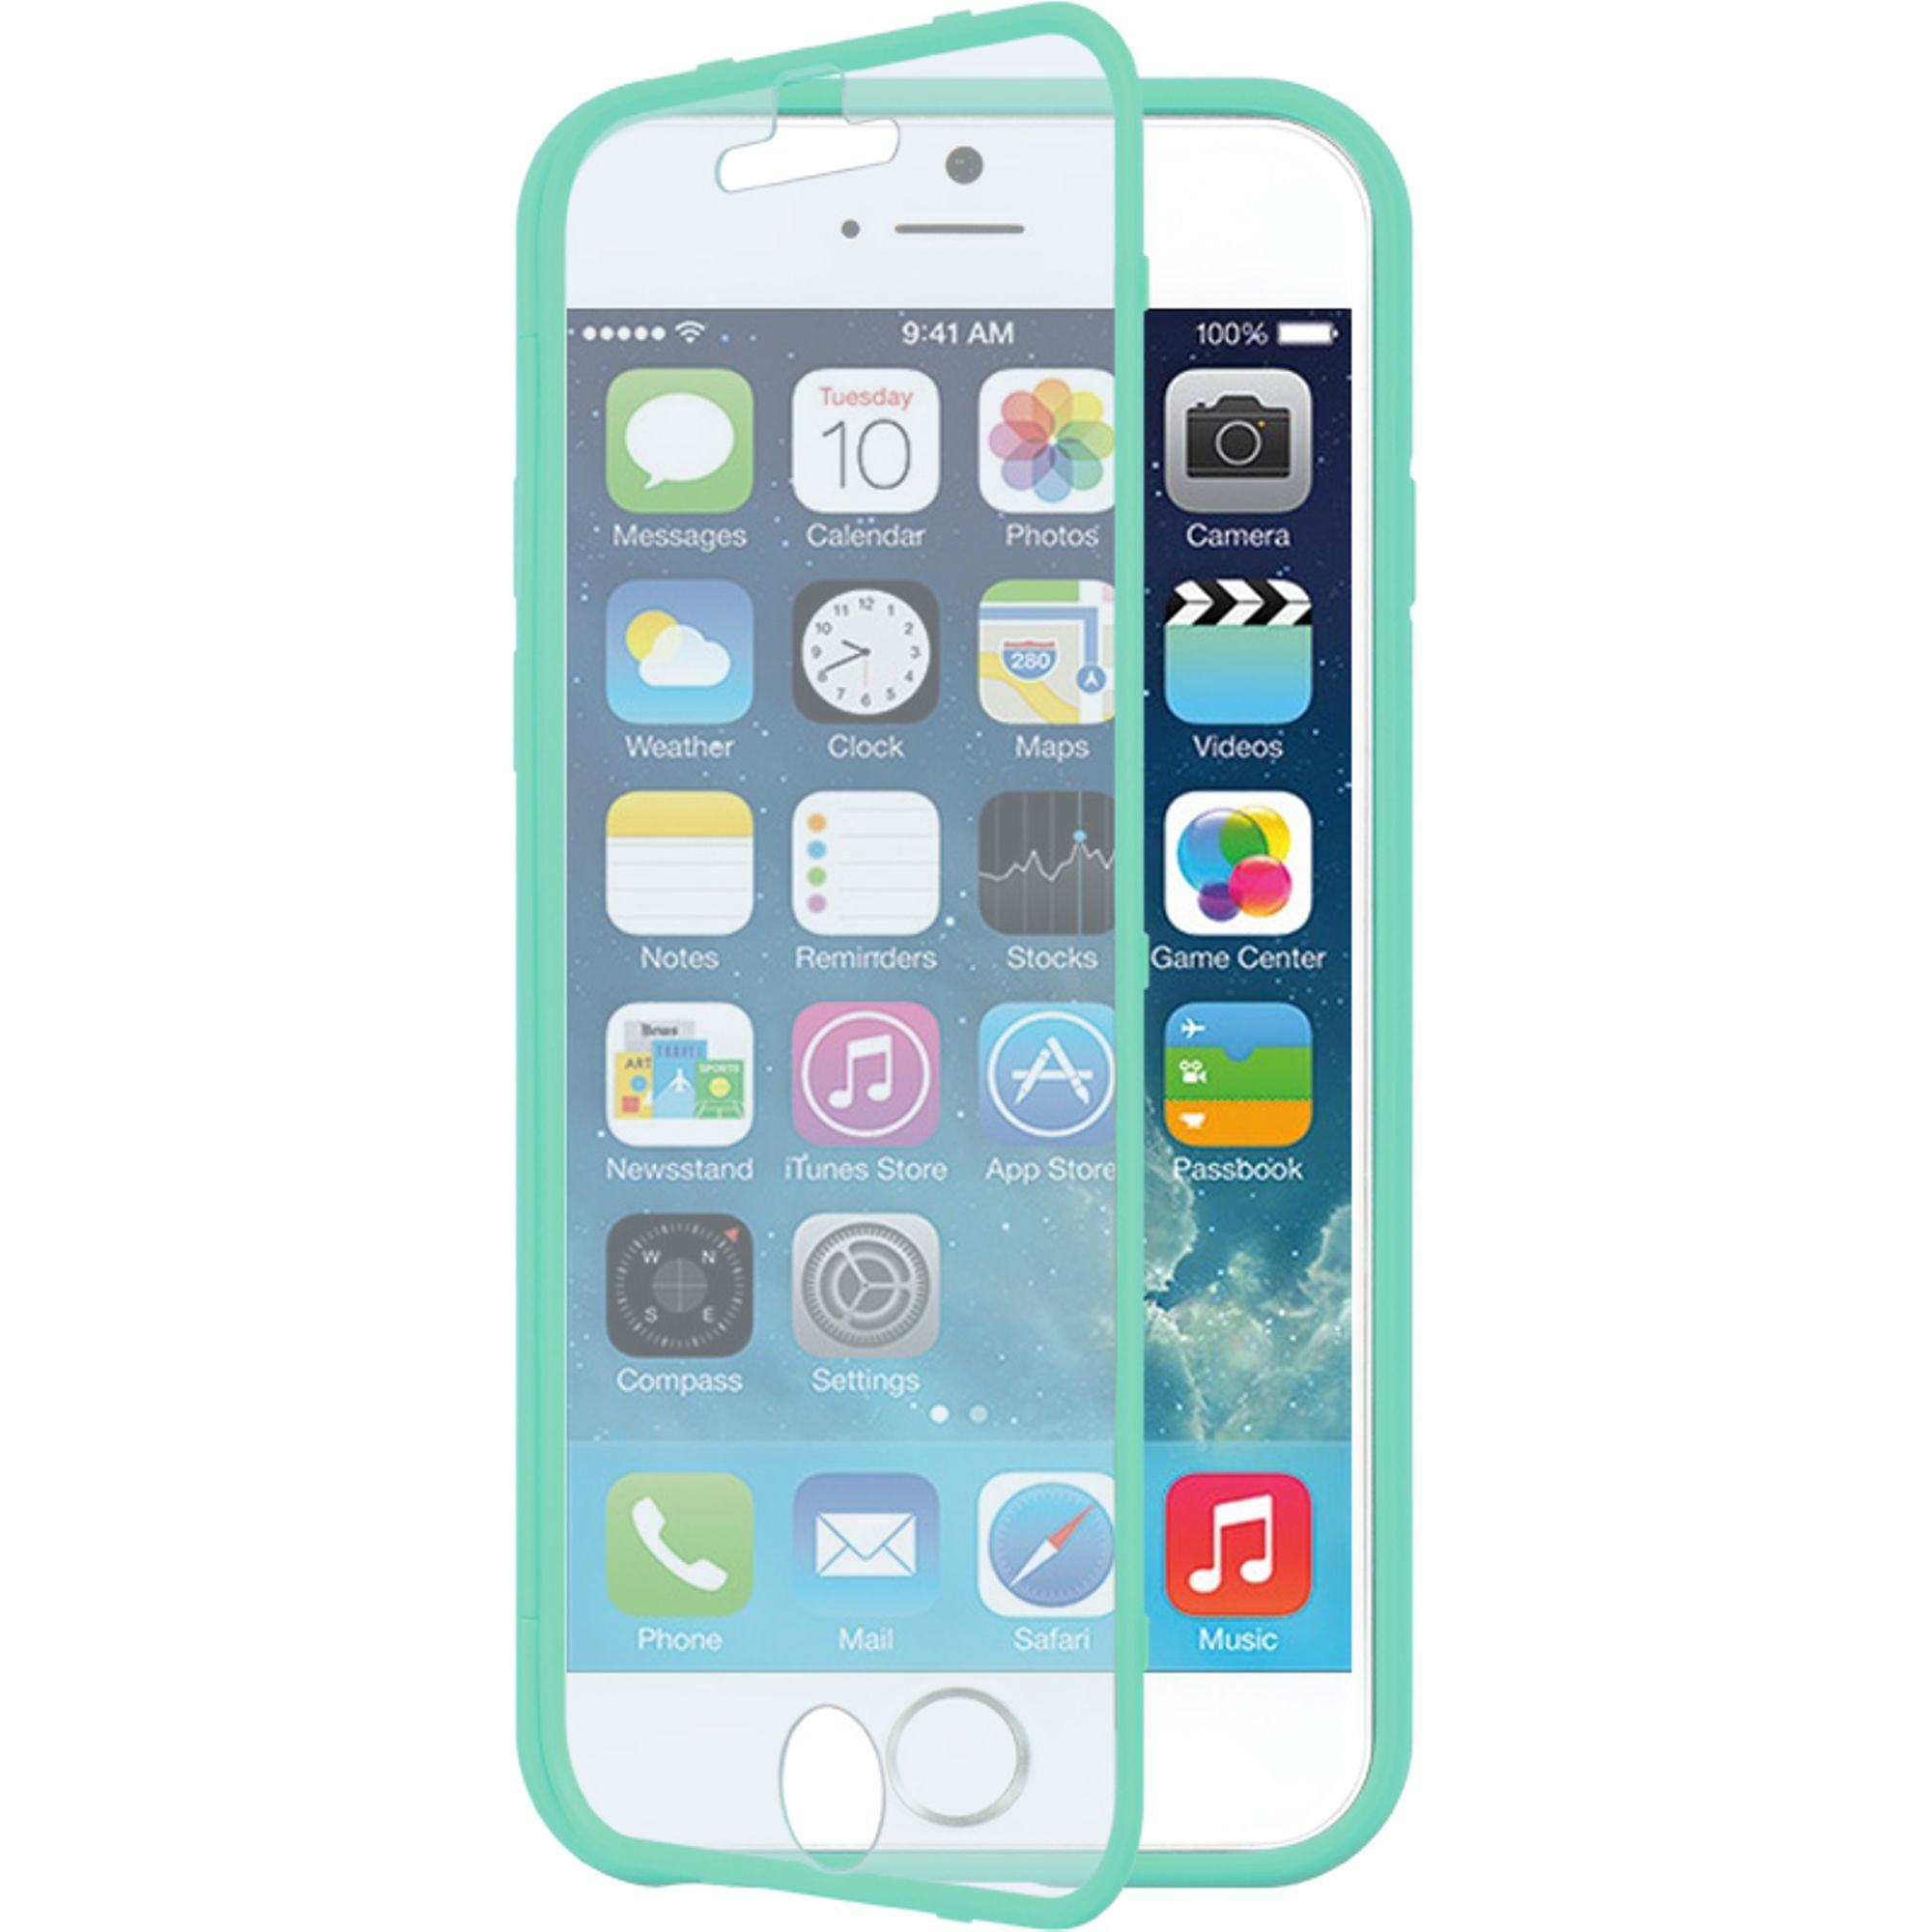 DreamWireless Wrap Up Rubber Coated Hard Snap-in Case Cover With Screen Protector For Apple iPhone 6, Teal